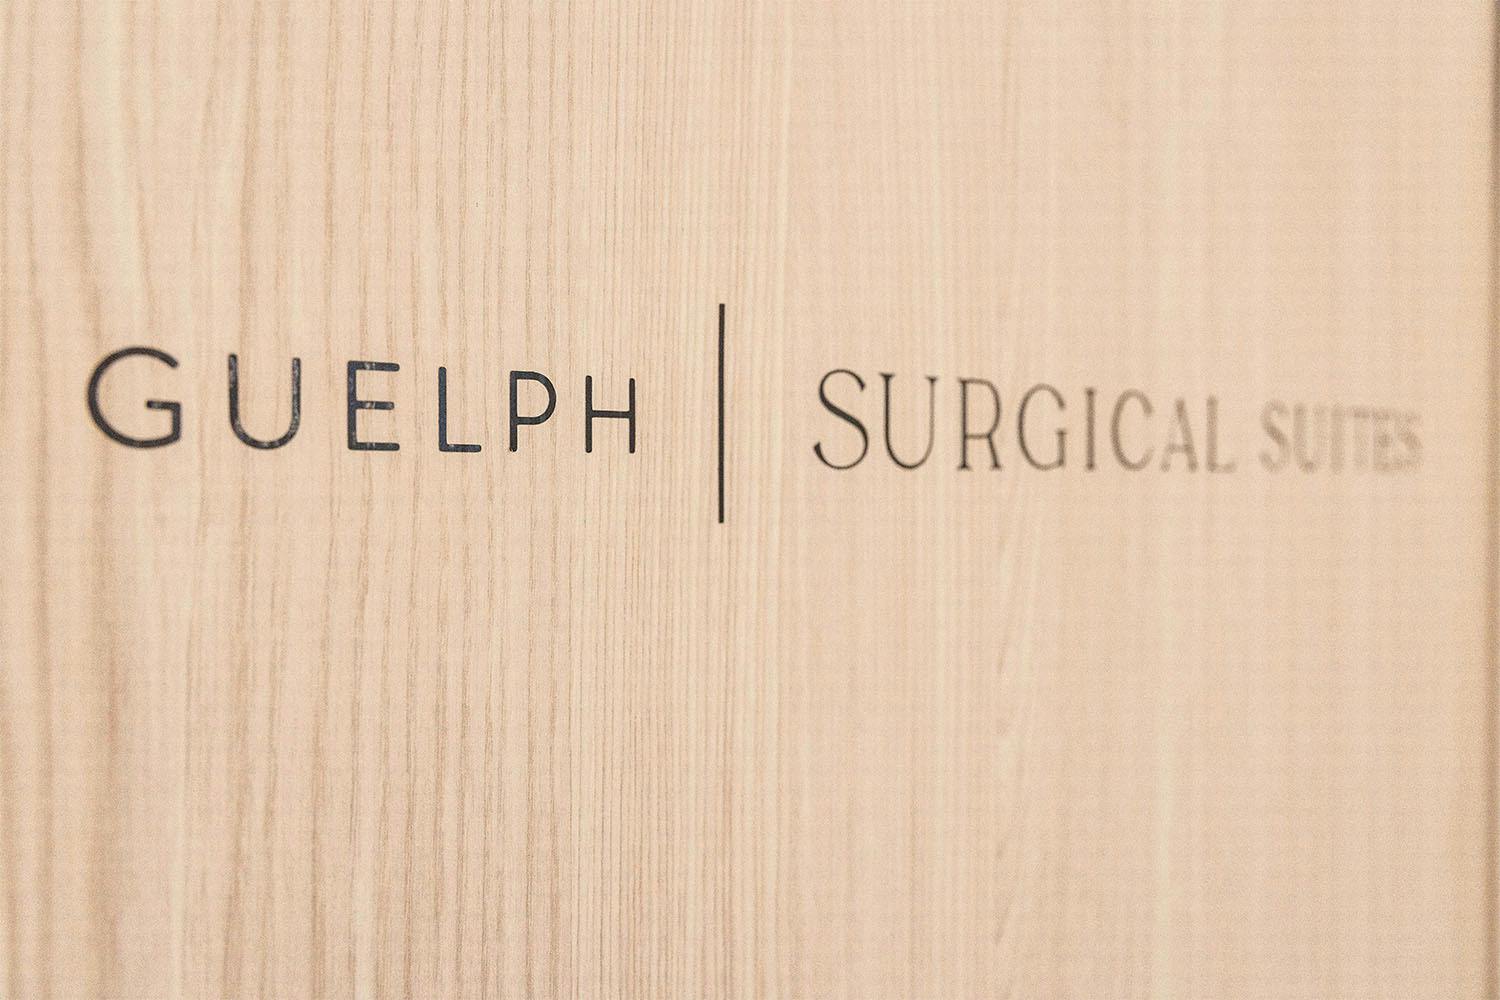 Guelph Surgical Suites Sign